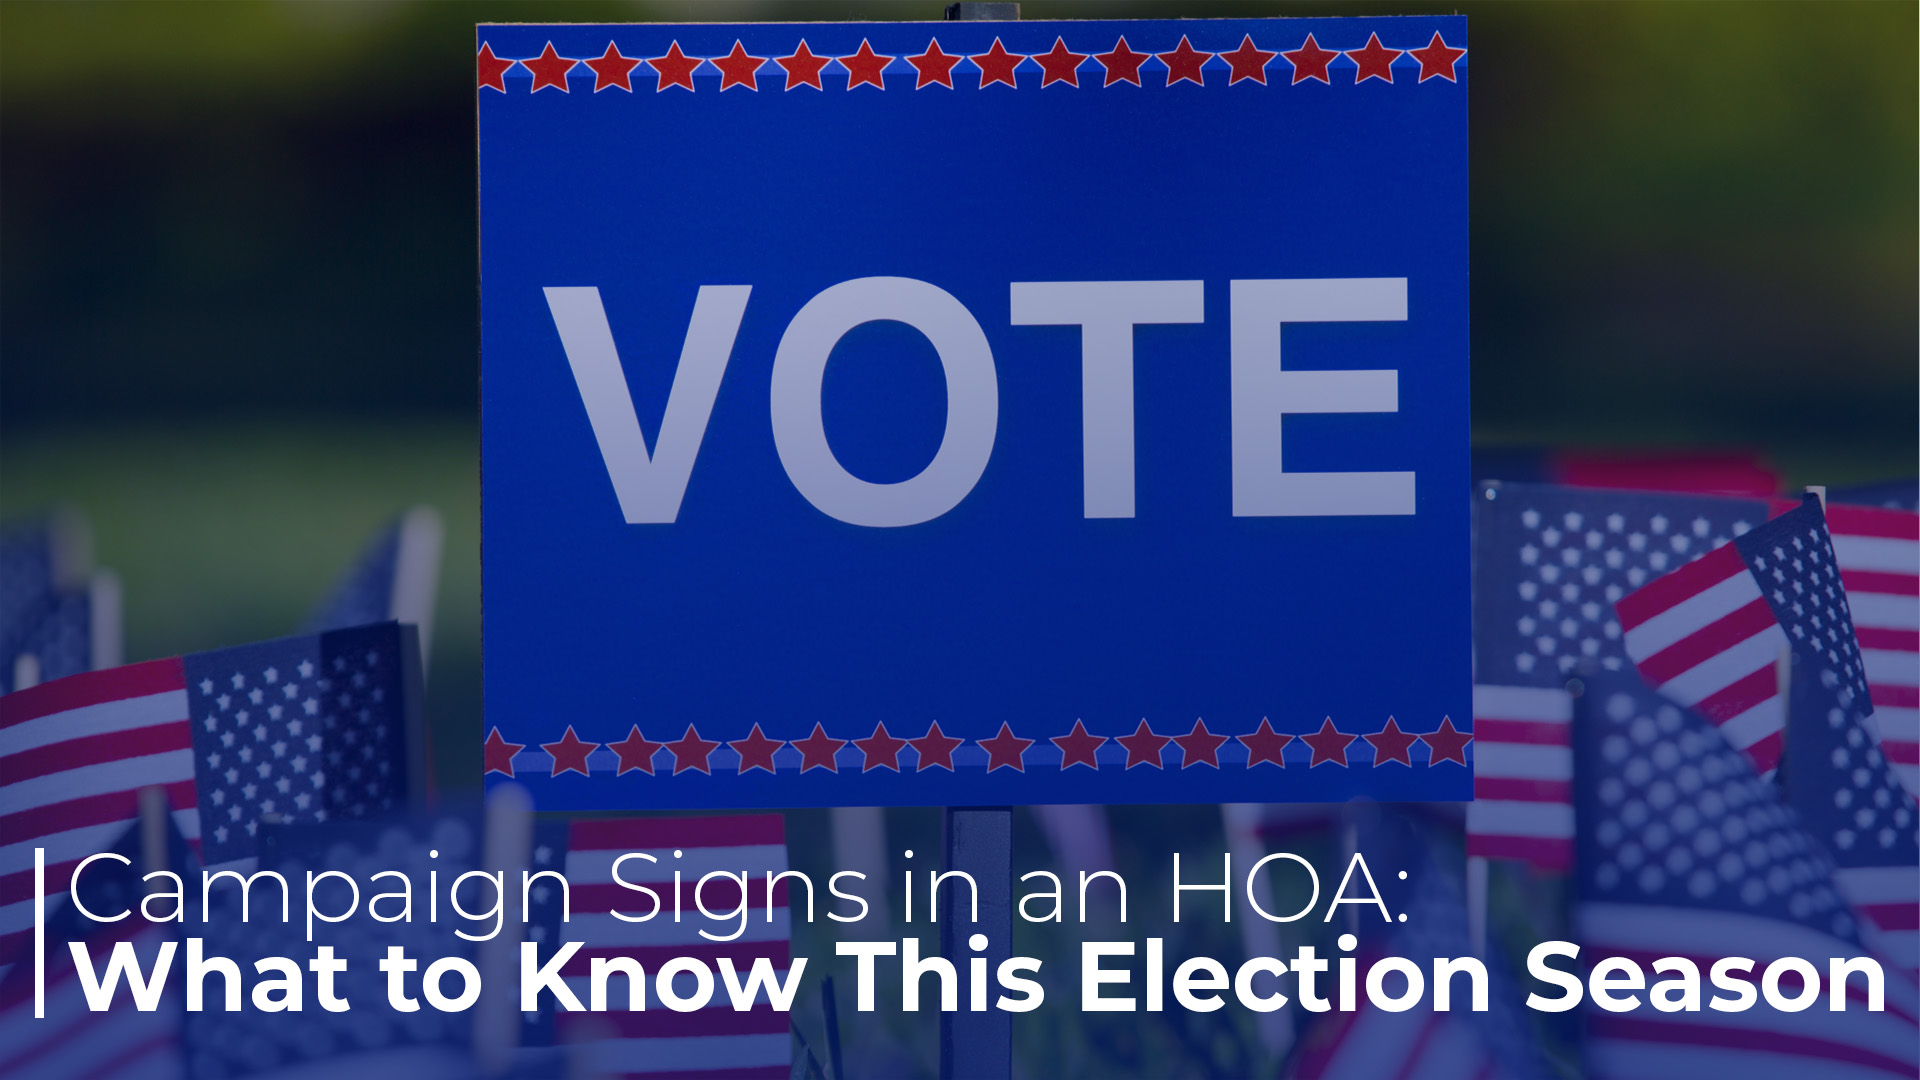 Campaign Signs in an HOA What to Know This Election Season